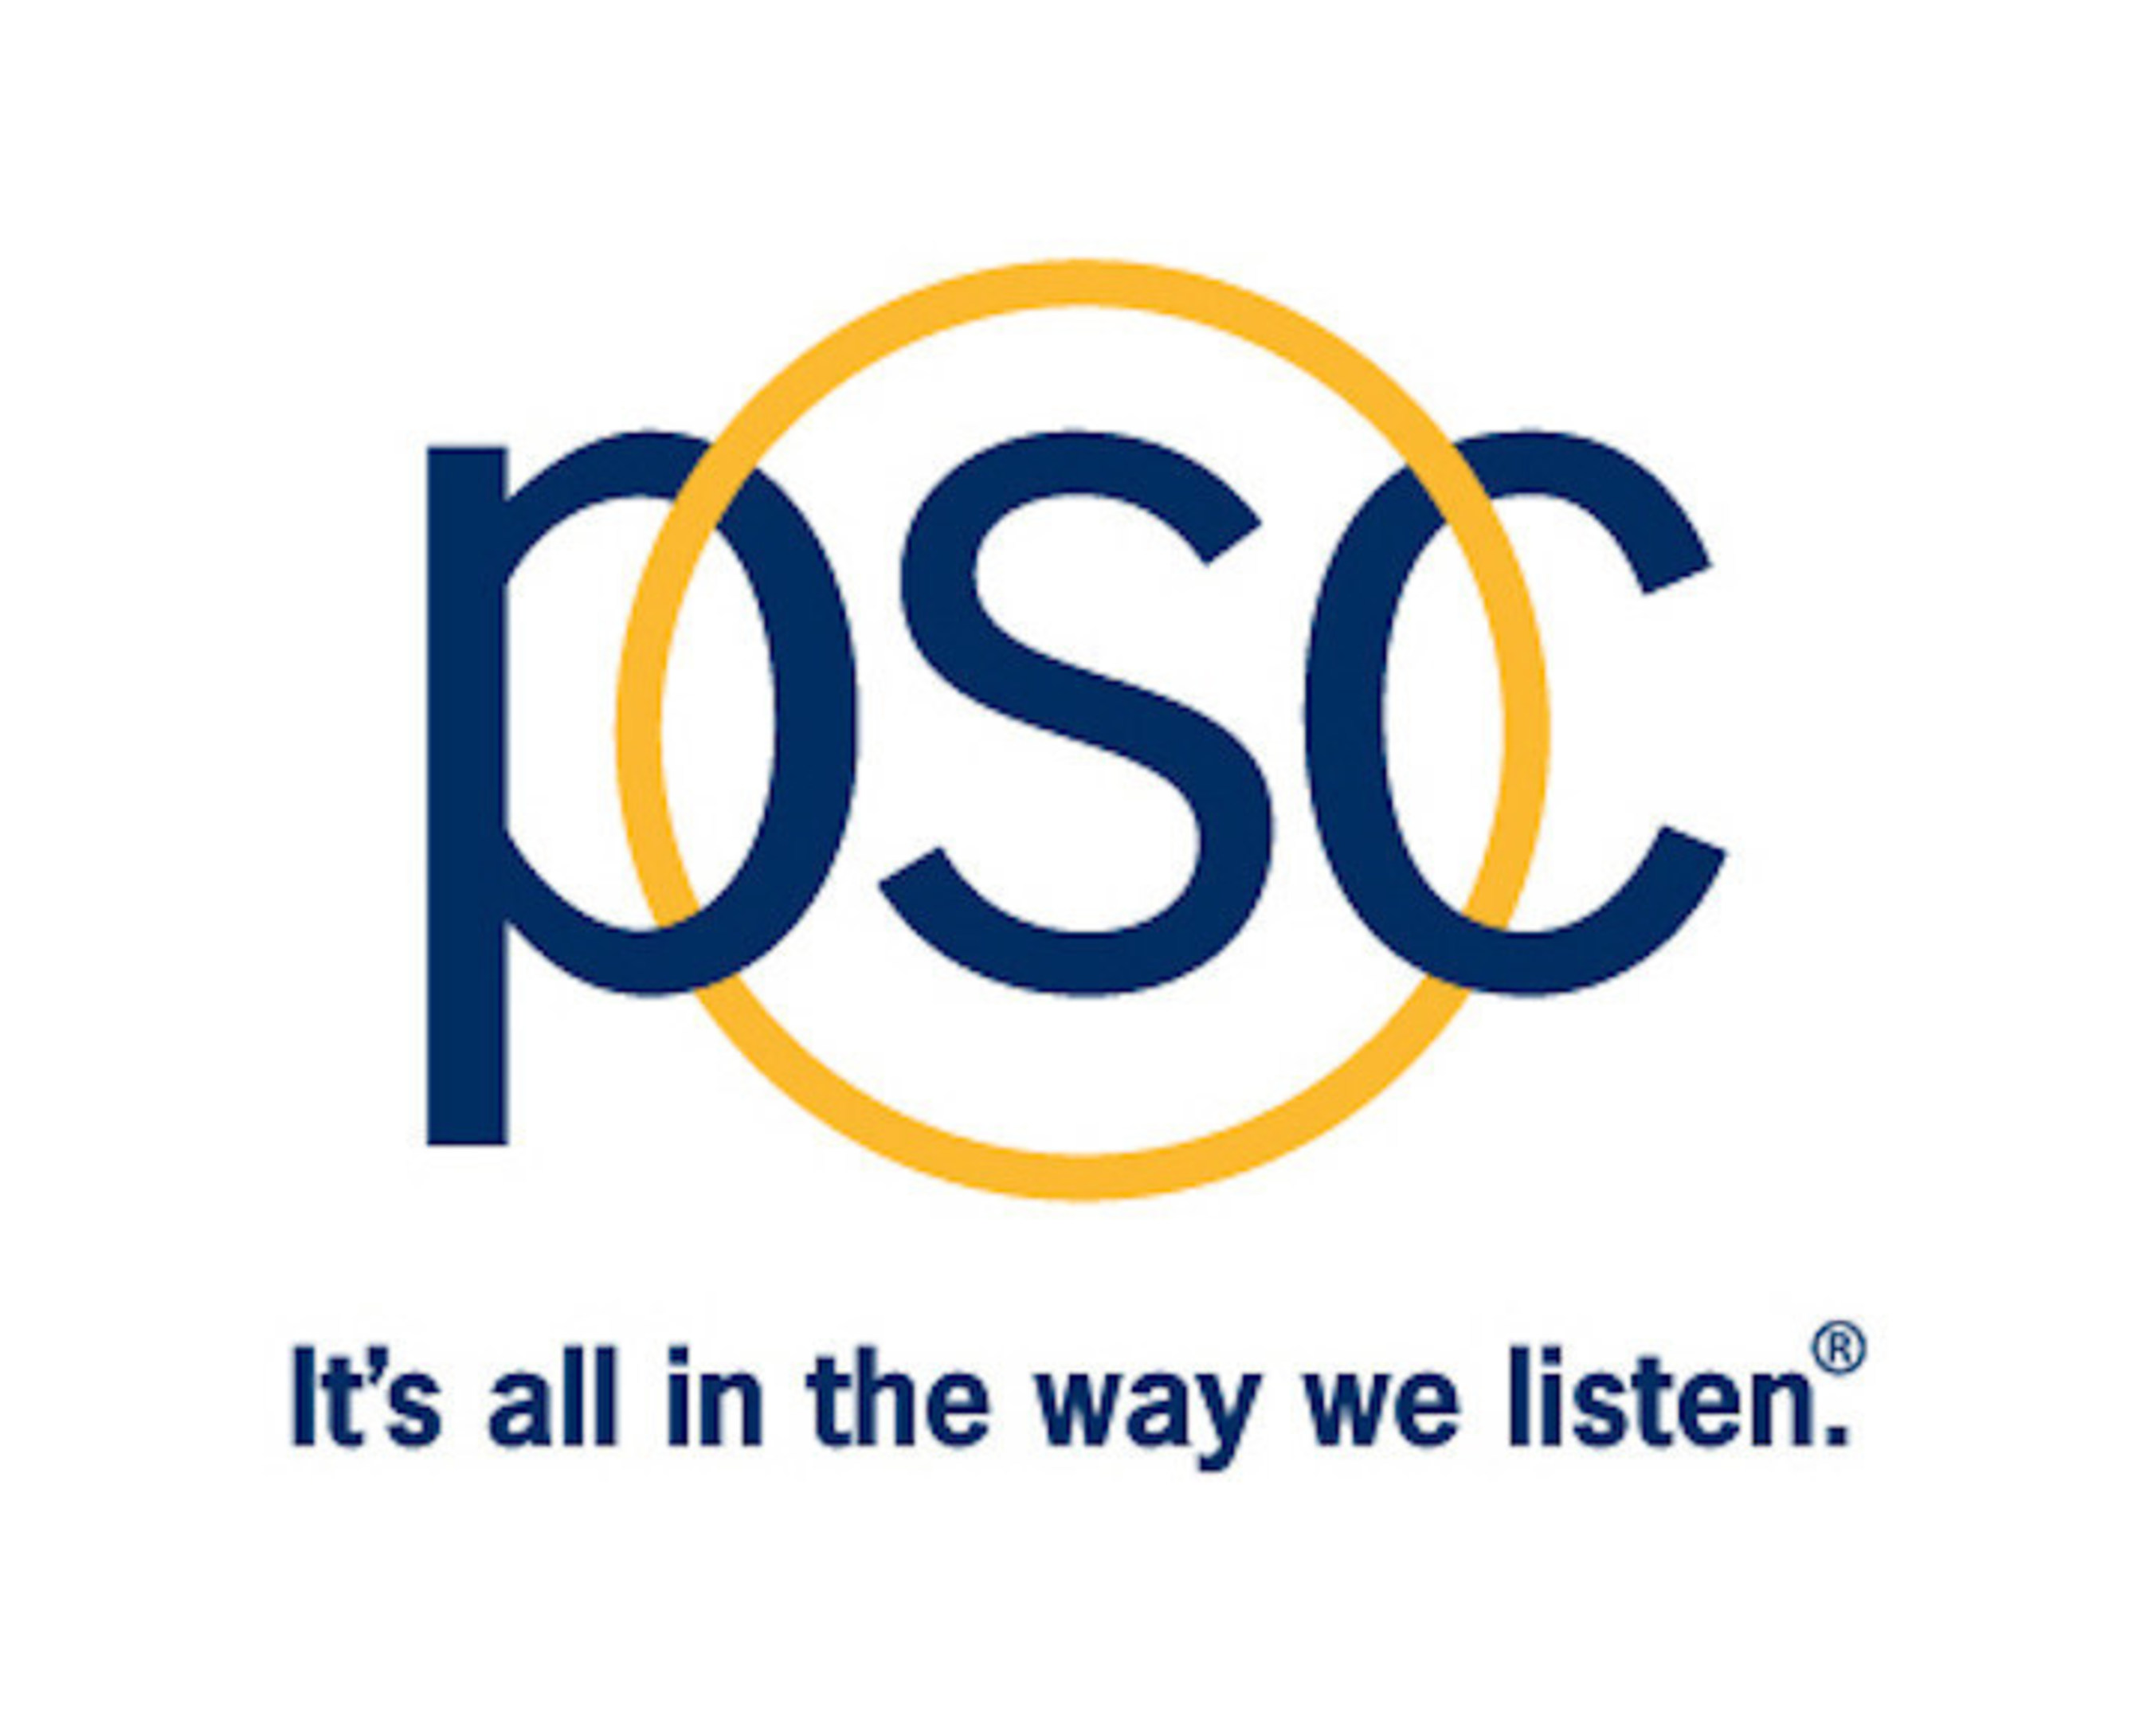 PSC Group, LLC "It's all in the way we listen"